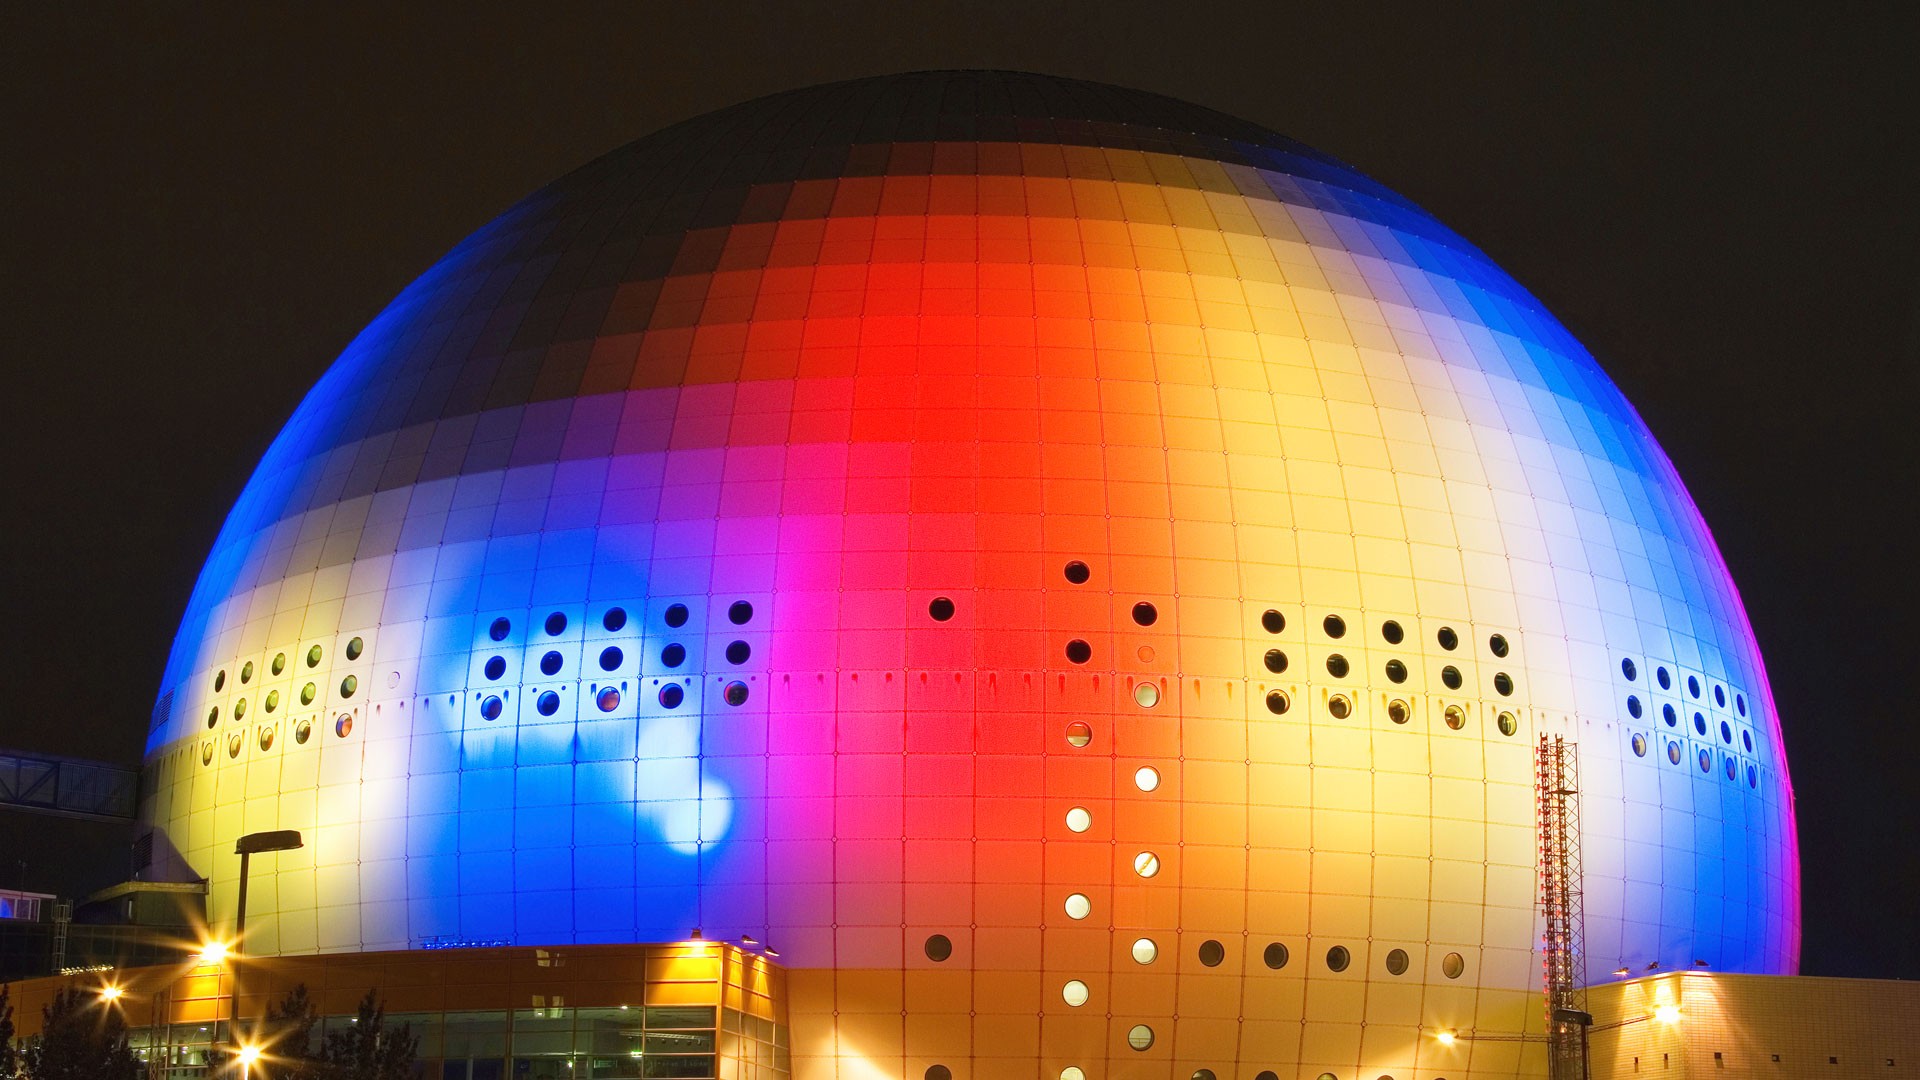 General 1920x1080 architecture modern sphere night sky museum circle colorful lights Stockholm Avicii Arena Ericsson